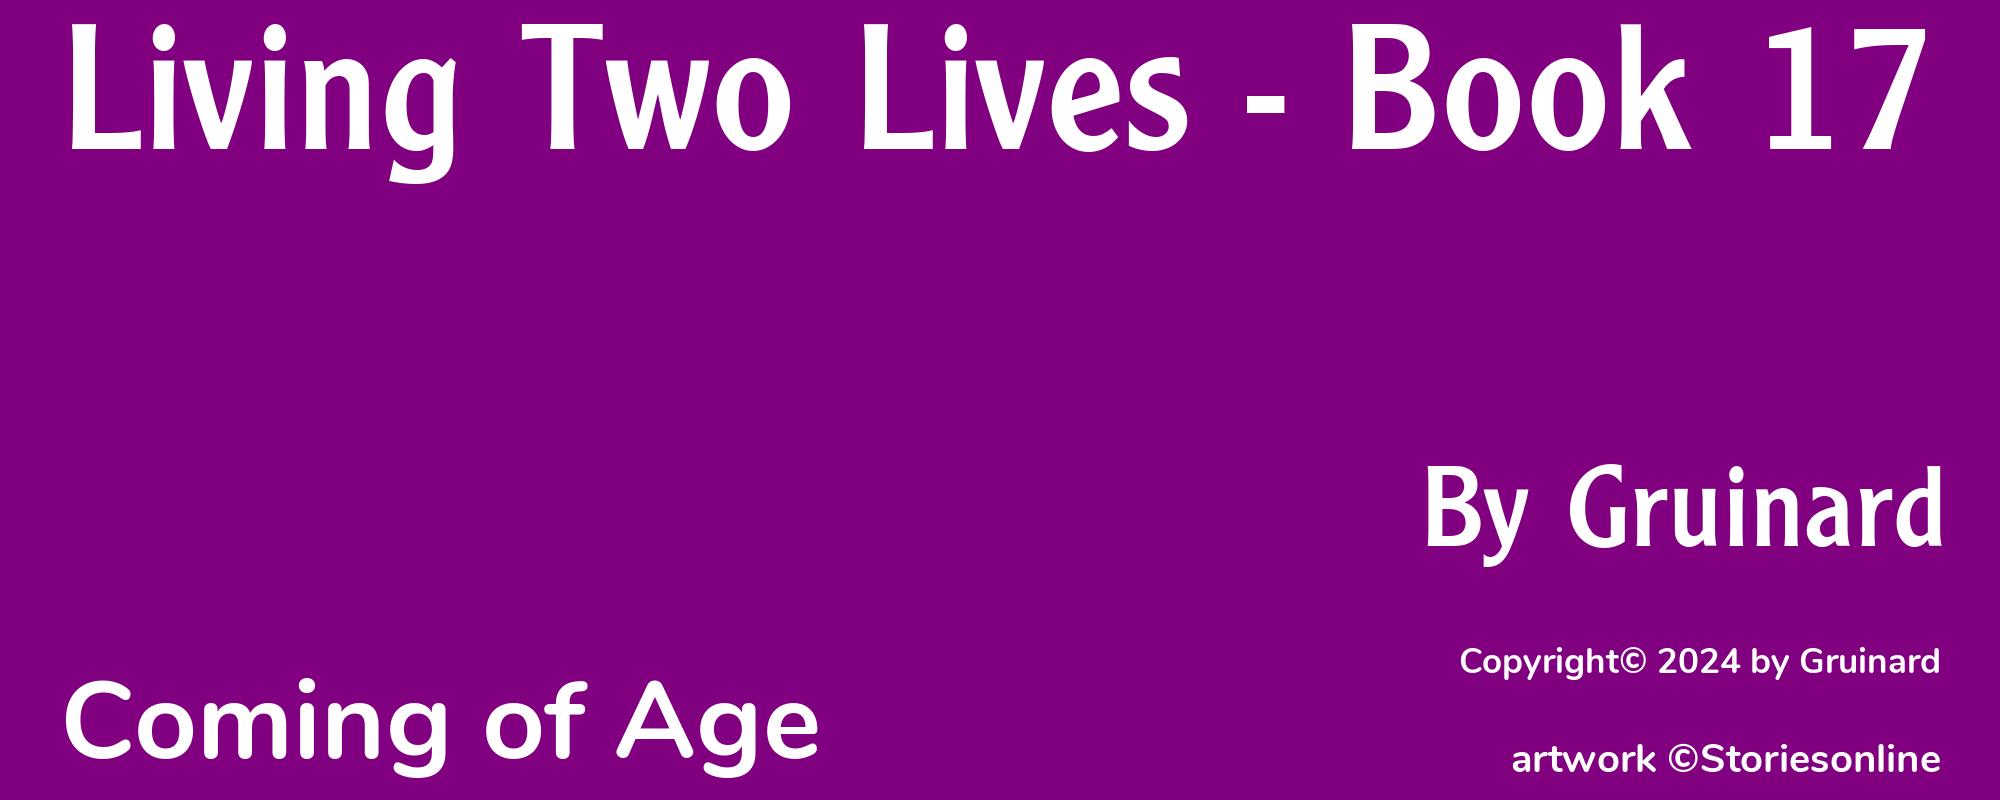 Living Two Lives - Book 17 - Cover